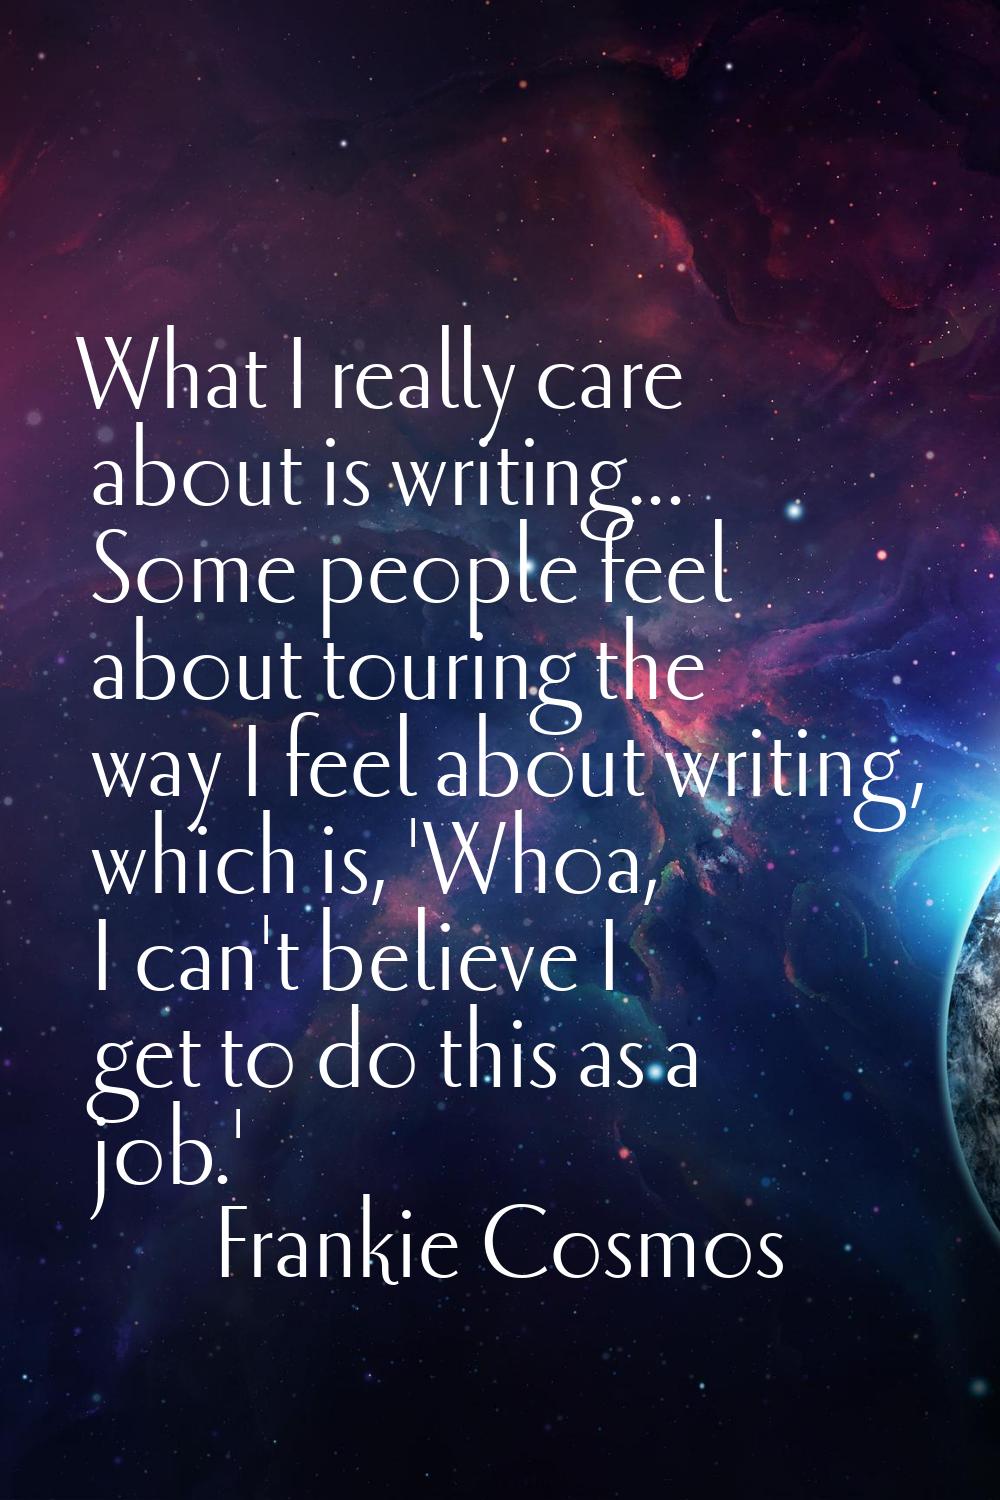 What I really care about is writing... Some people feel about touring the way I feel about writing,